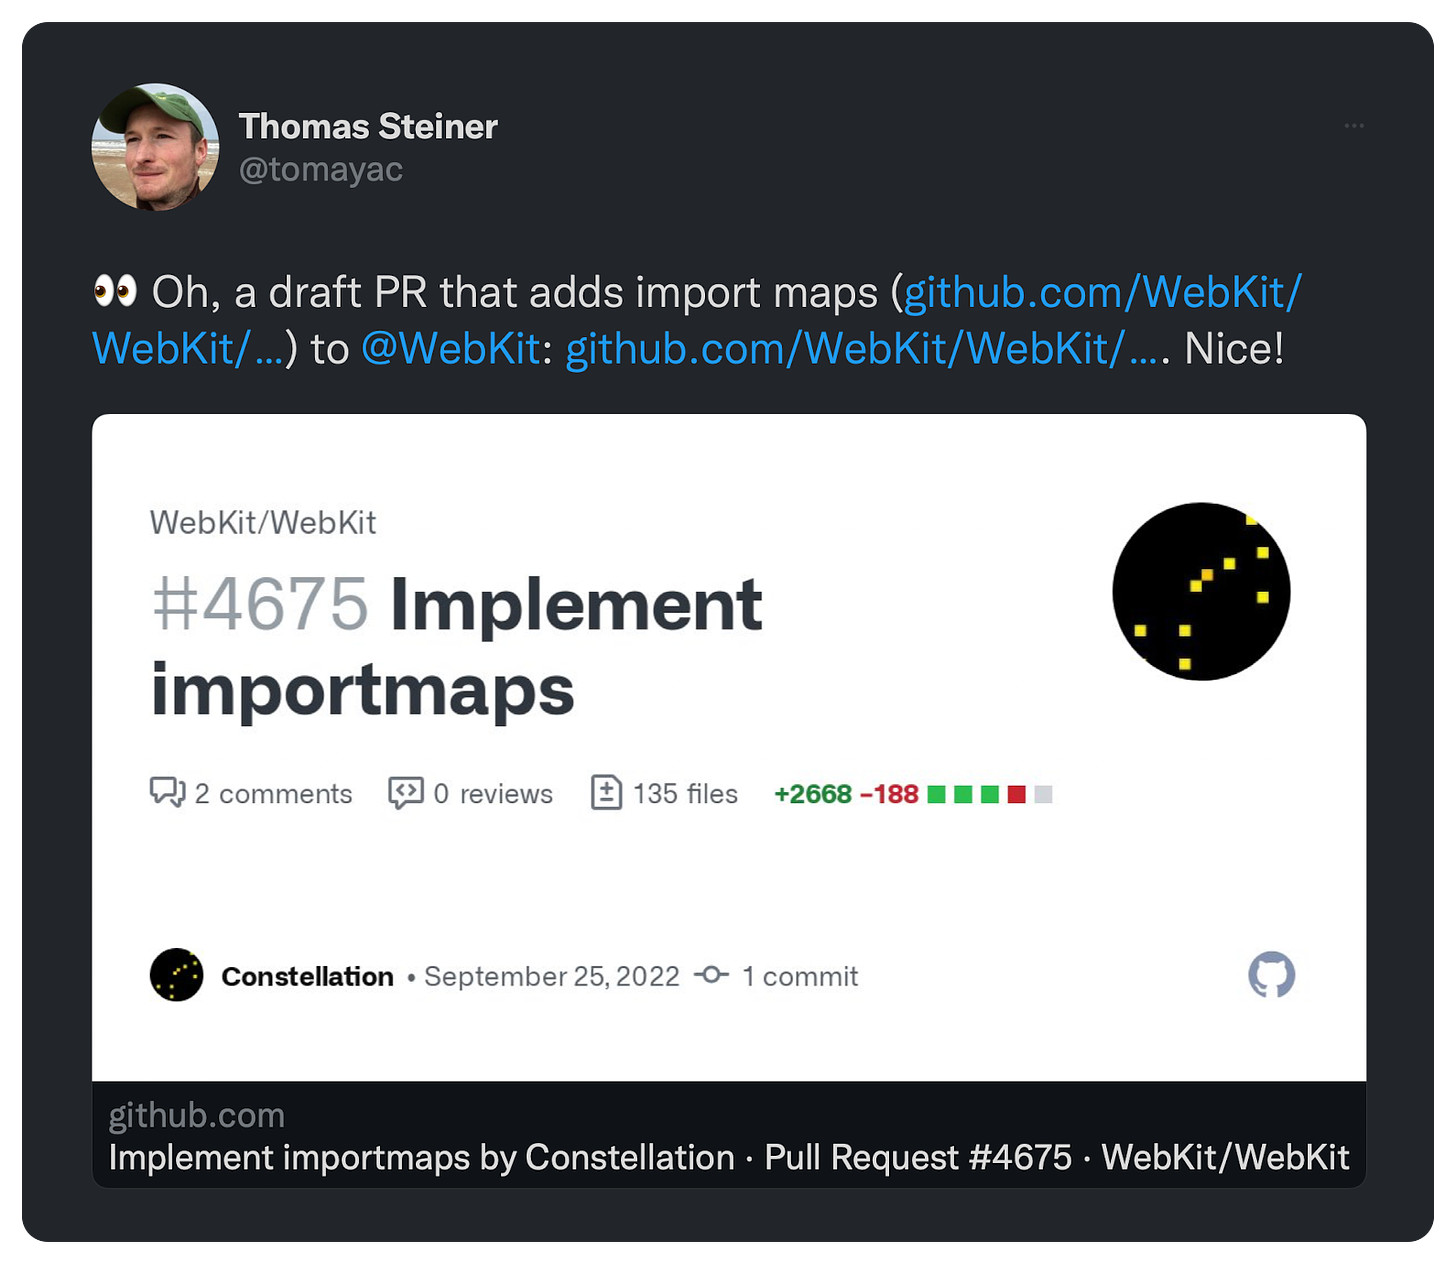 👀 Oh, a draft PR that adds import maps (https://t.co/GxMpSNQjY8) to @WebKit: https://t.co/GxMpSNQjY8. Nice!